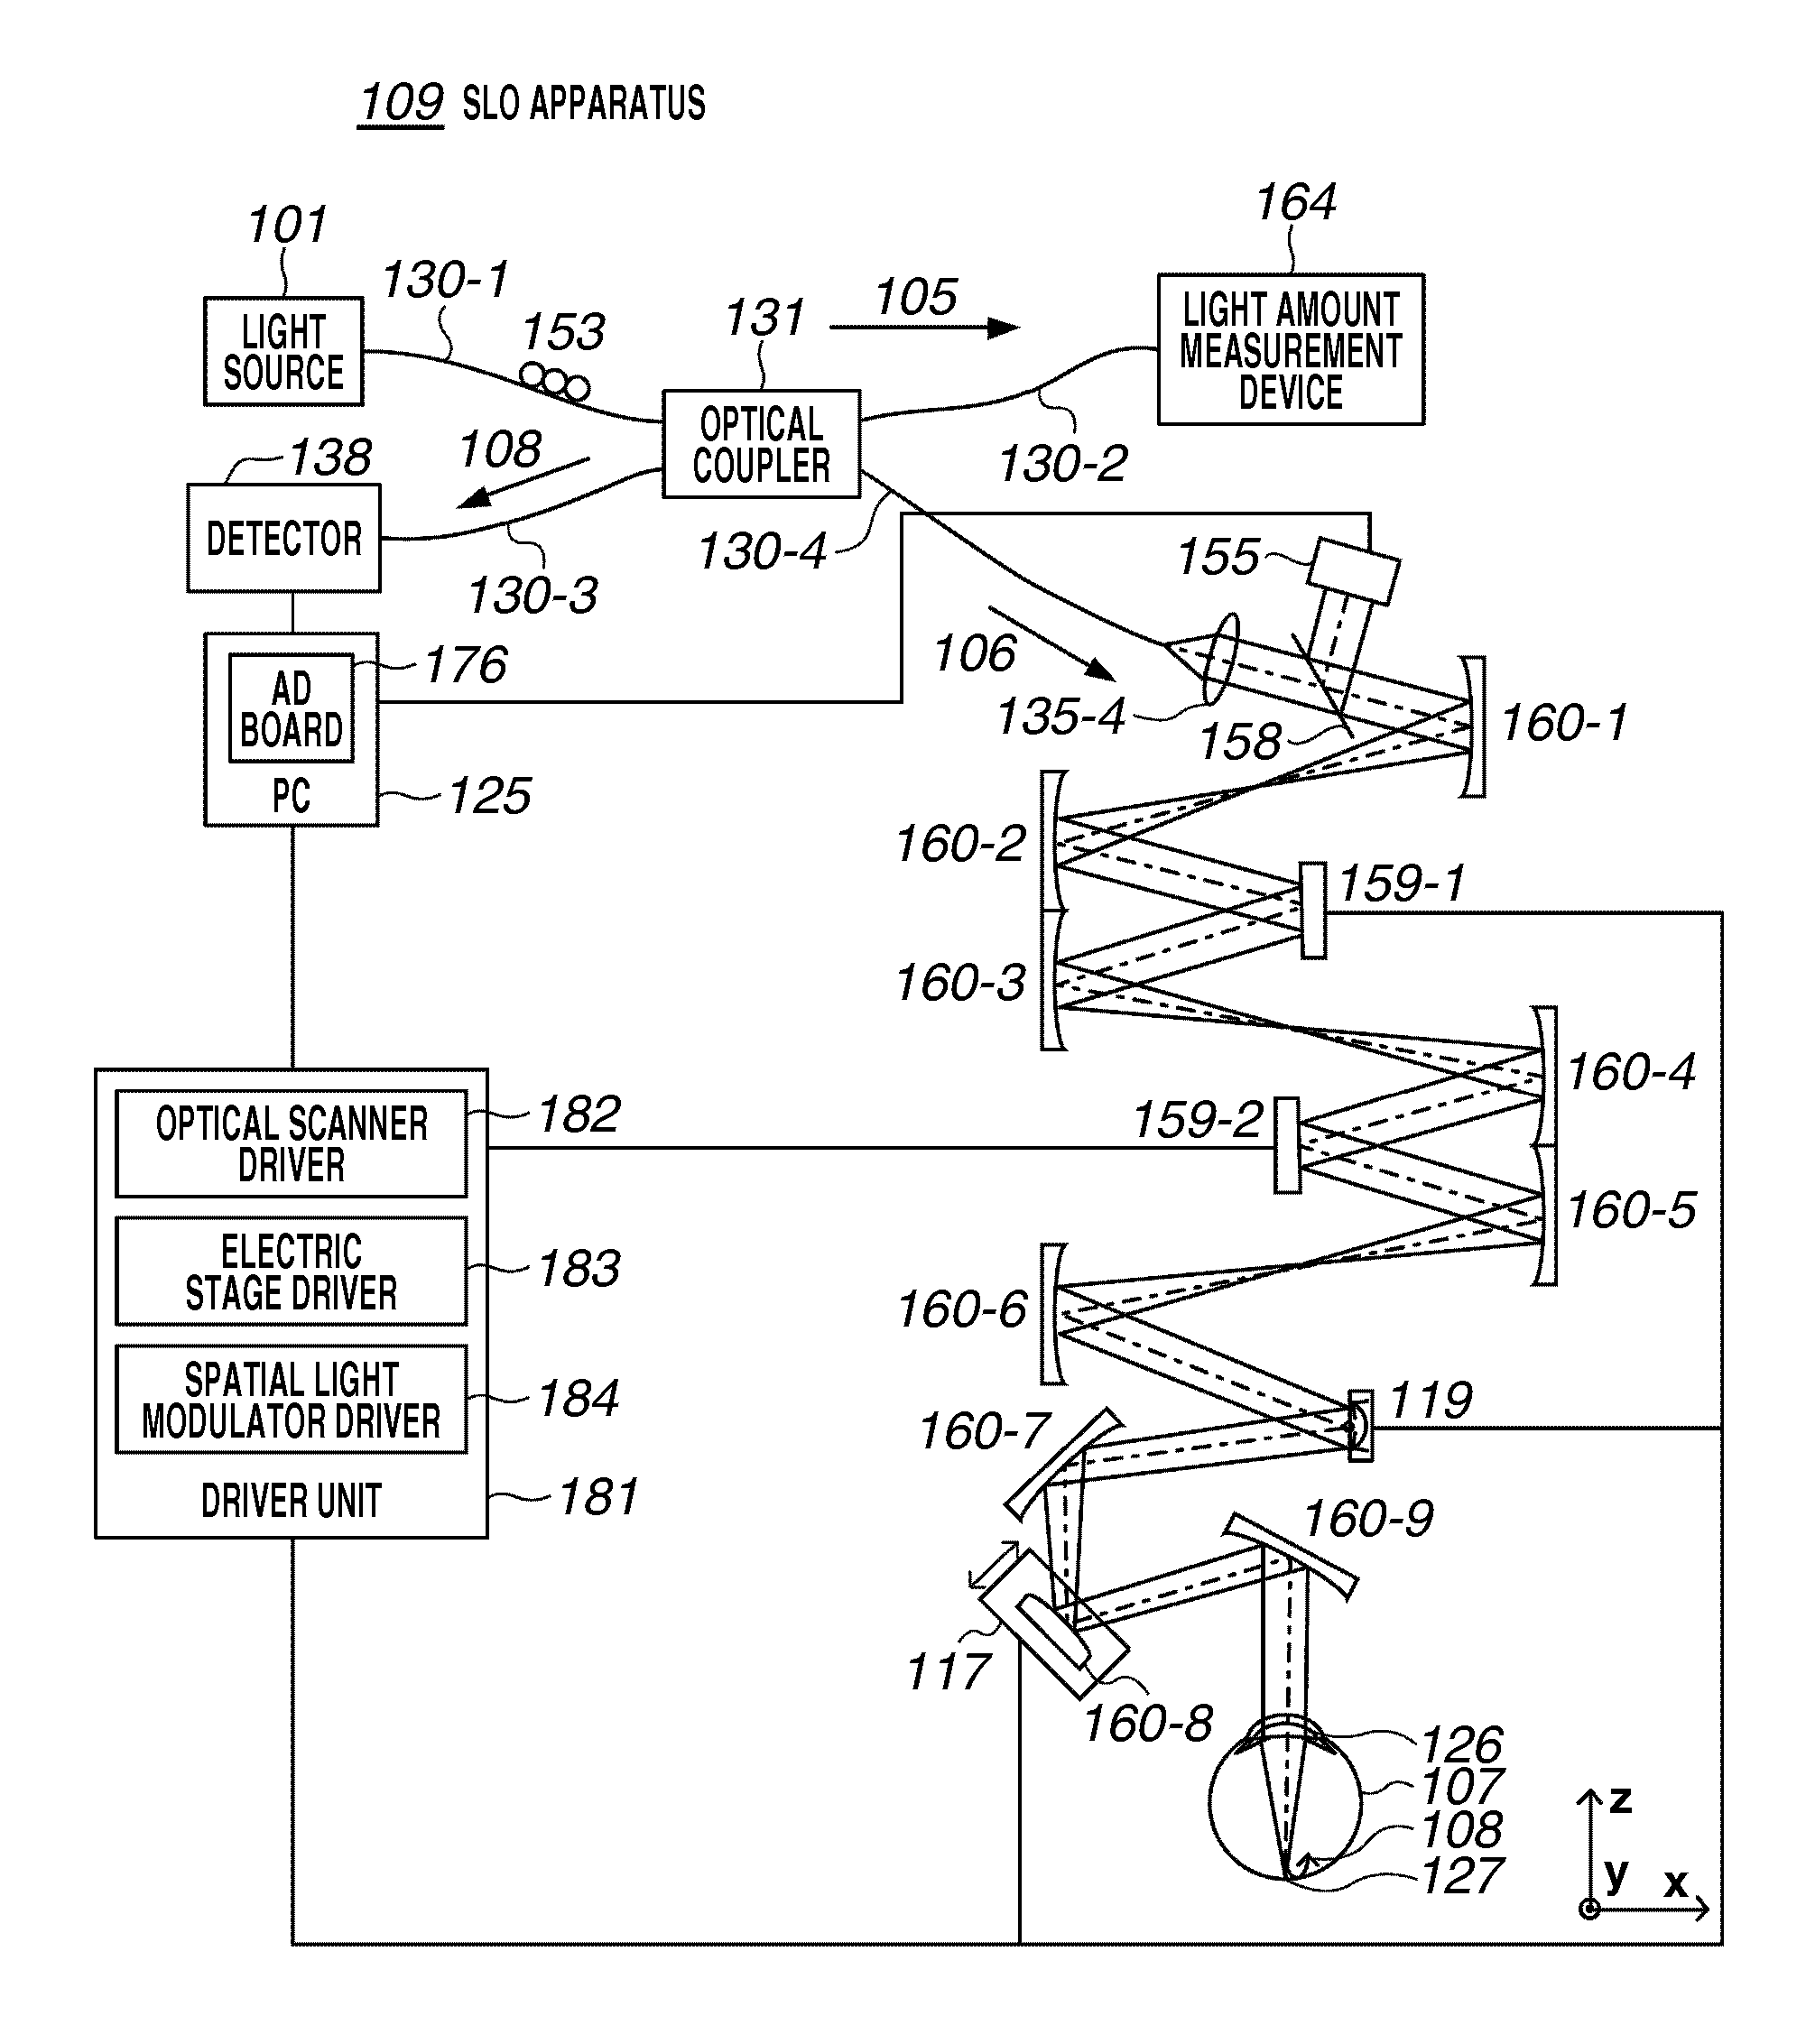 Ophthalmic apparatus, ophthalmic system, processing apparatus, and blood flow velocity calculation method